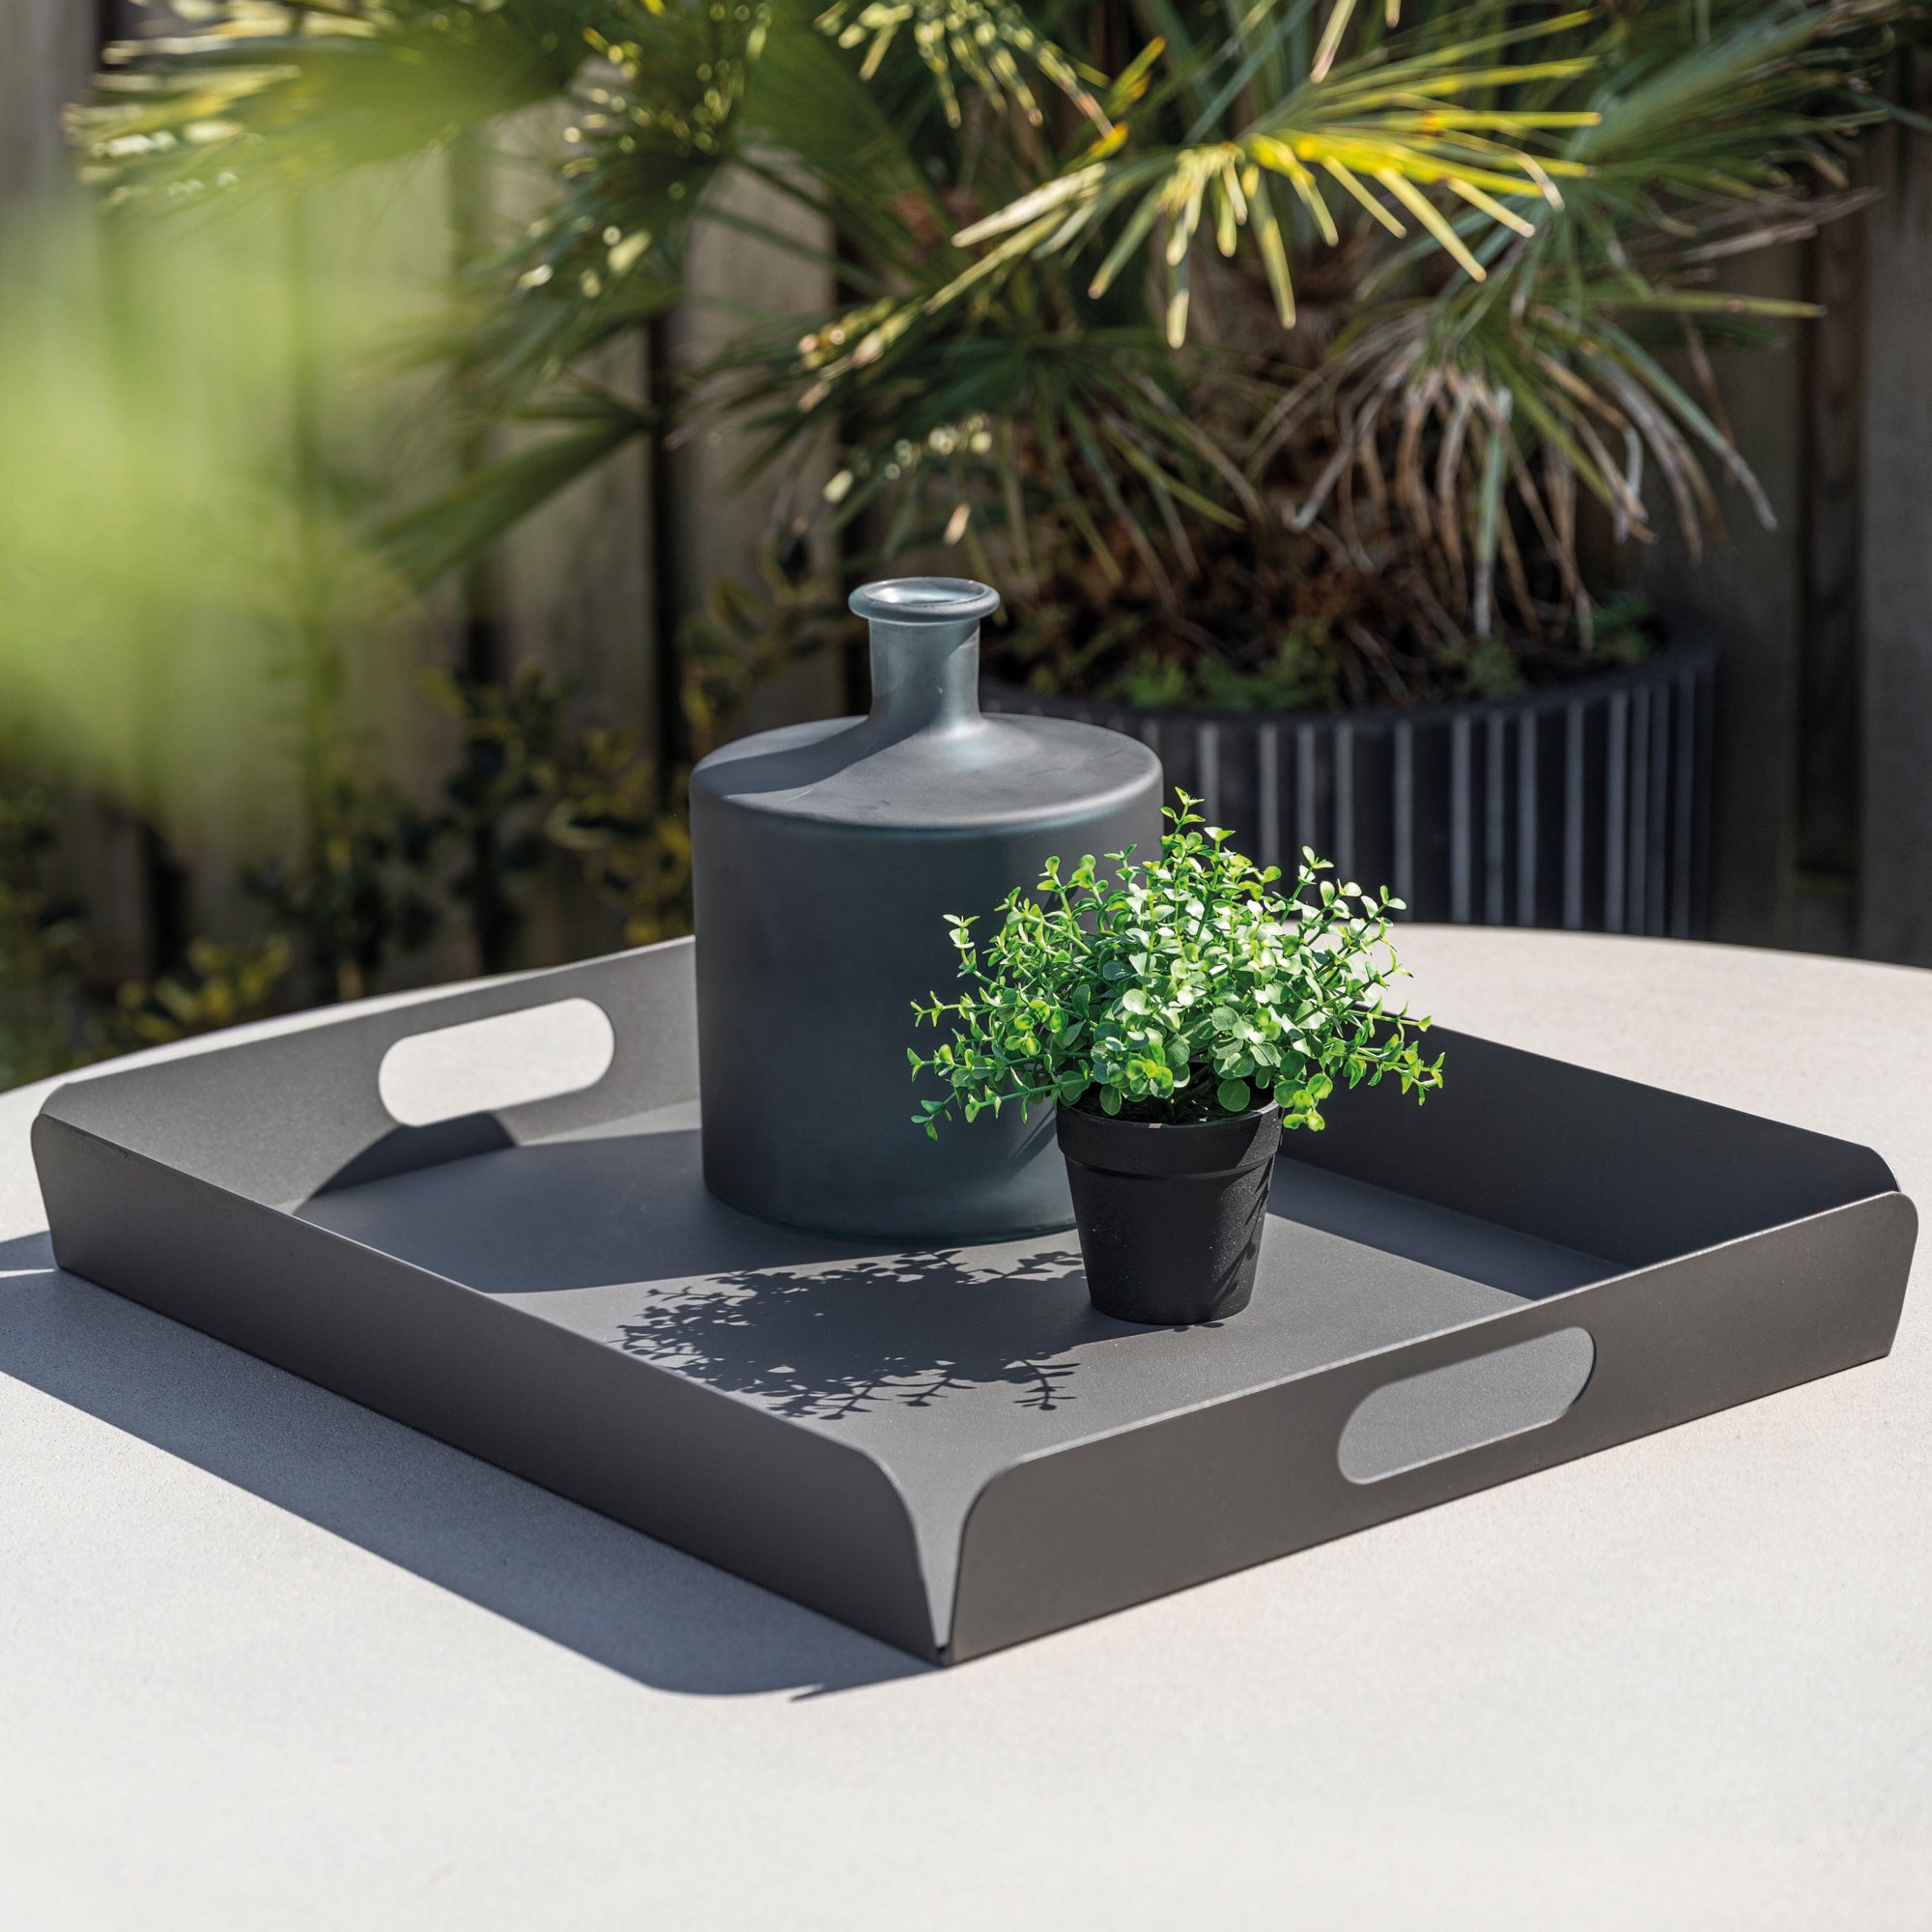 Patio Accessories such as Serving Trays, Umbrellas, Firepits, Hammocks and more to compliment any style.